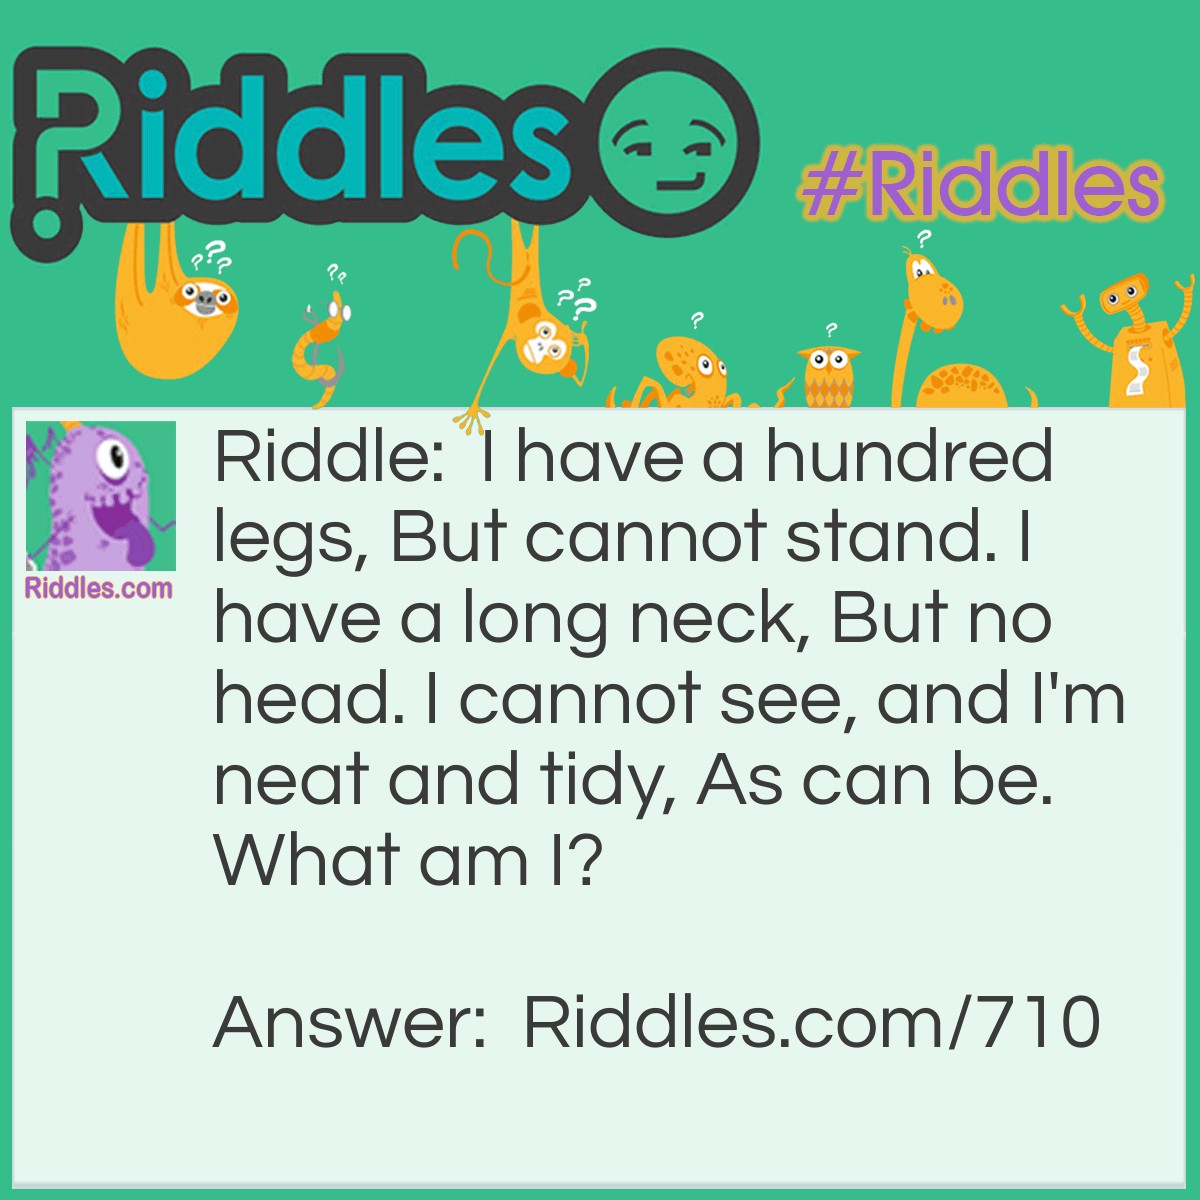 Riddle: I have a hundred legs, But cannot stand. I have a long neck, But no head. I cannot see, and I'm neat and tidy, As can be.
What am I? Answer: I am a broom.